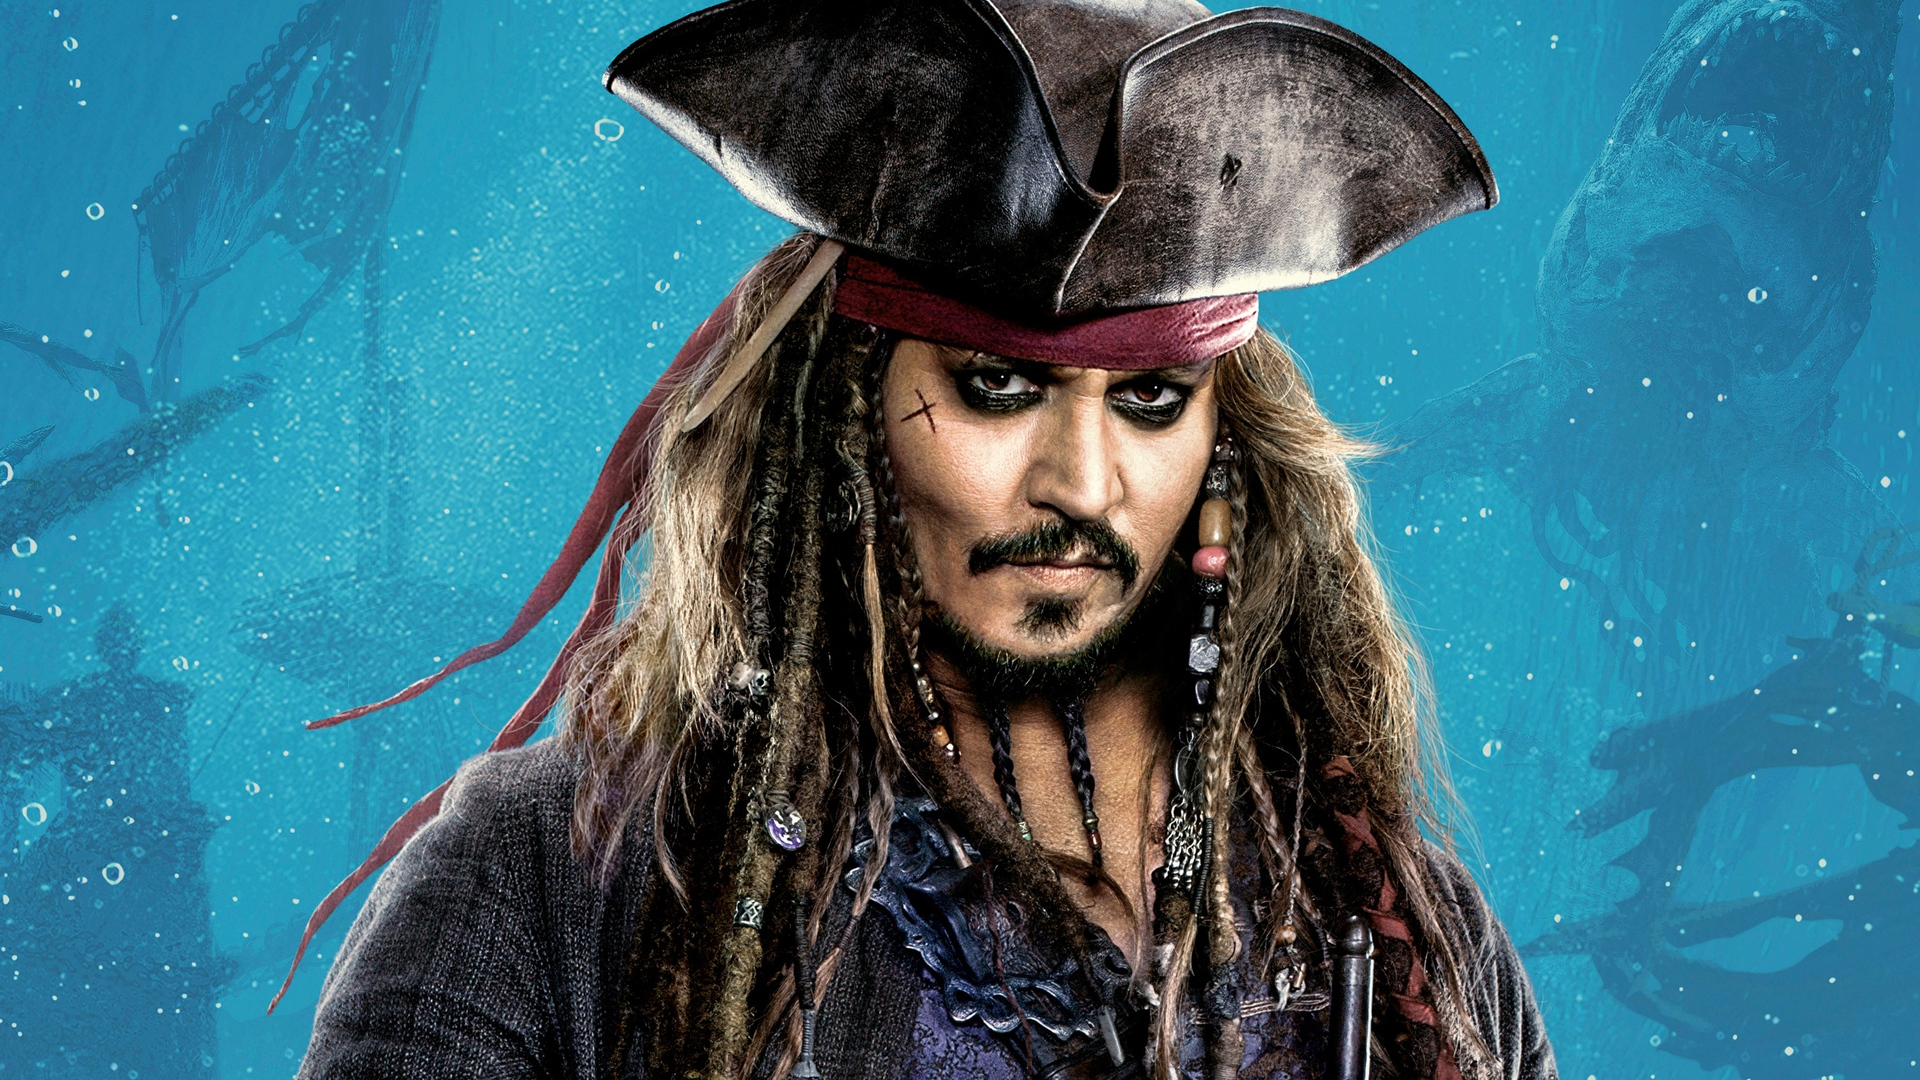 Johnny Depp Returning To Pirates Of The Caribbean?